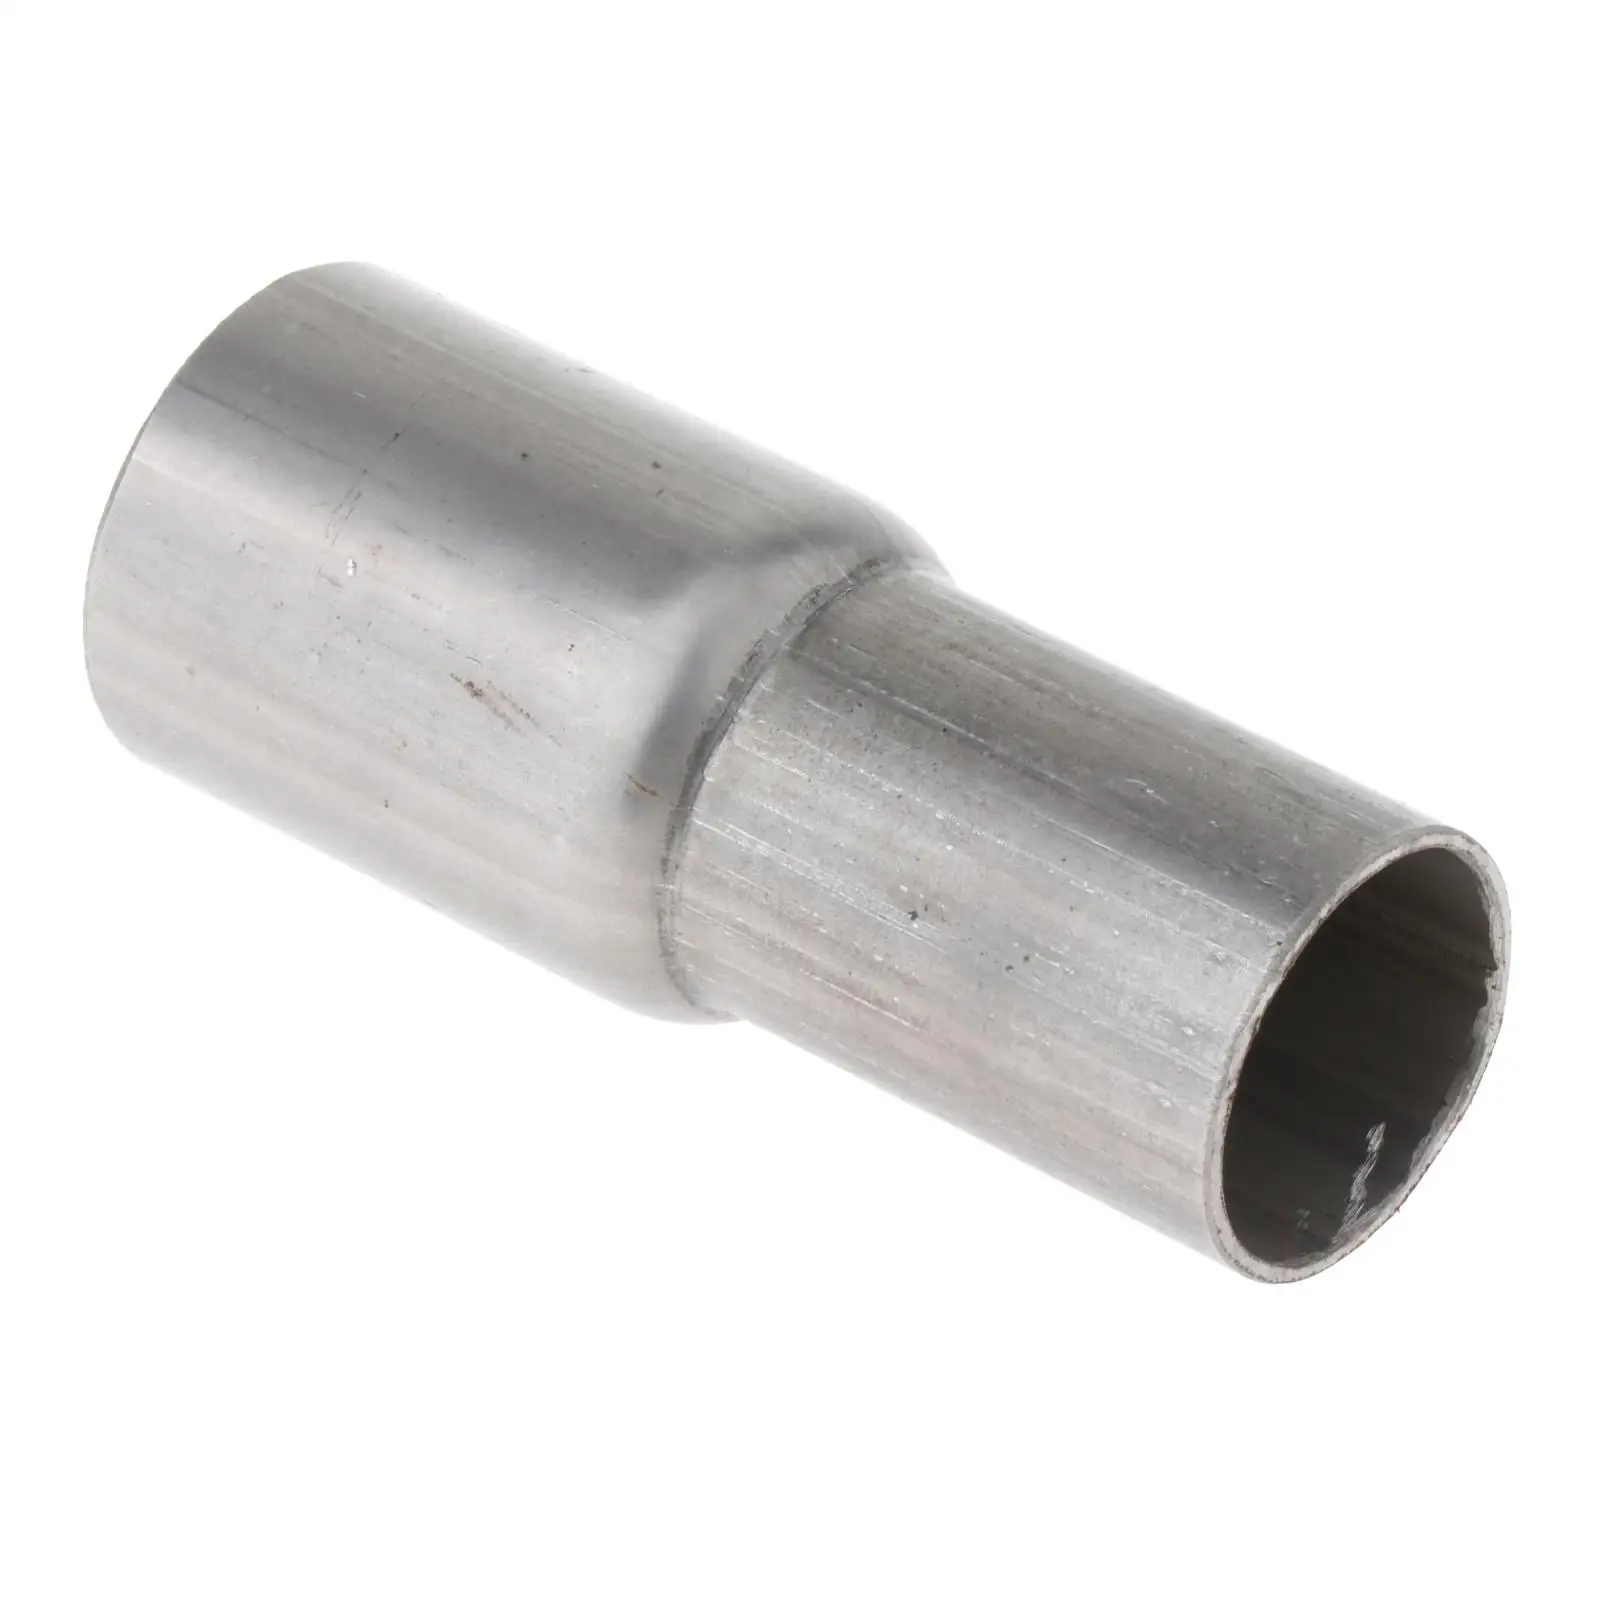 Exhaust Connector Pipe Durable Heavy Duty Universal Exhaust Pipe Adapter